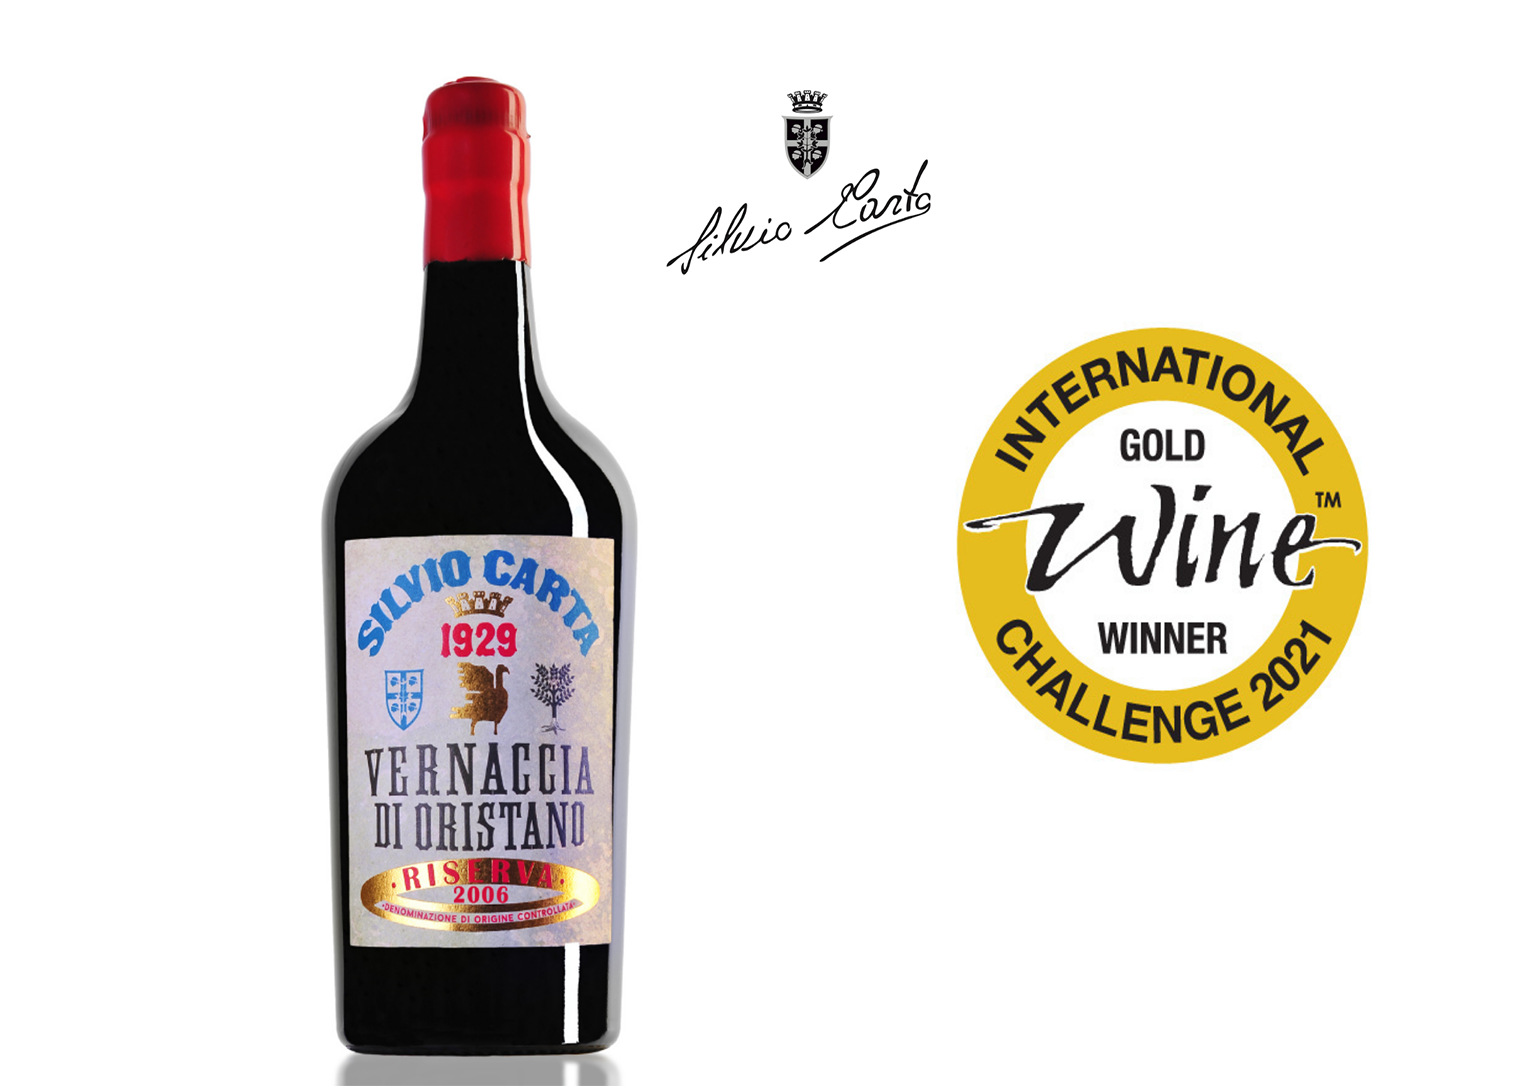 Vernaccia di Oristano DOC Riserva 2006 gives Sardinia the only gold of the IWC - International Wine Challenge in London